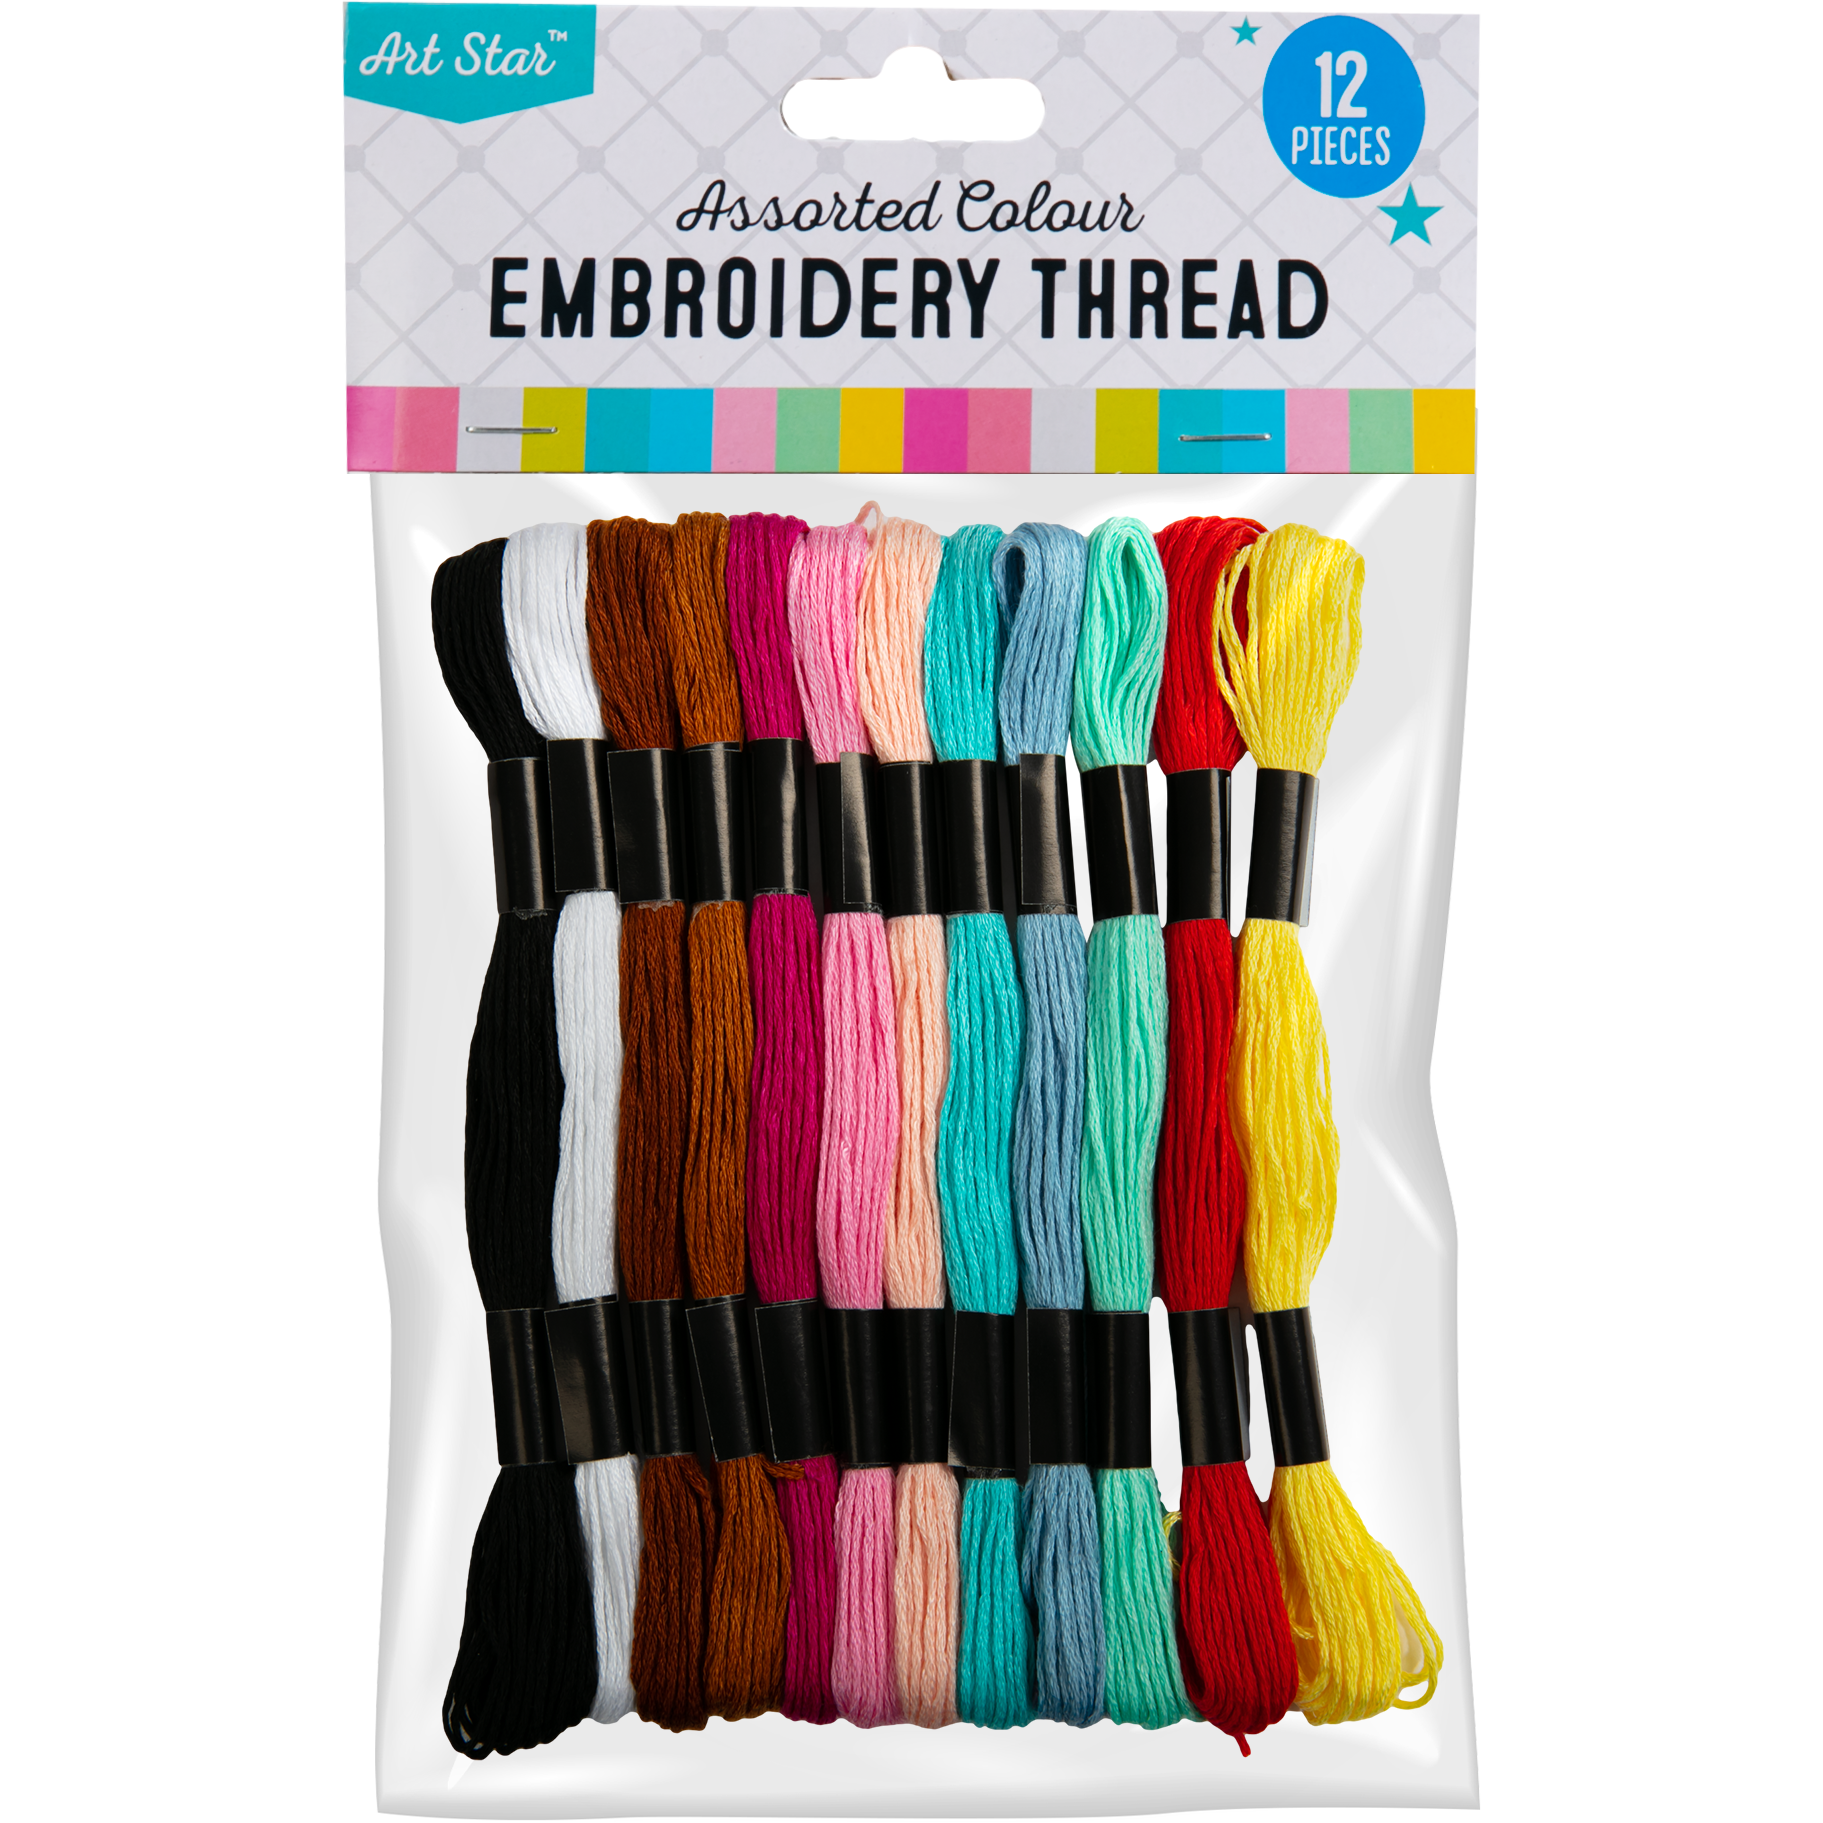 Image of Art Star Embroidery Thread Assorted Colours 12 Pieces